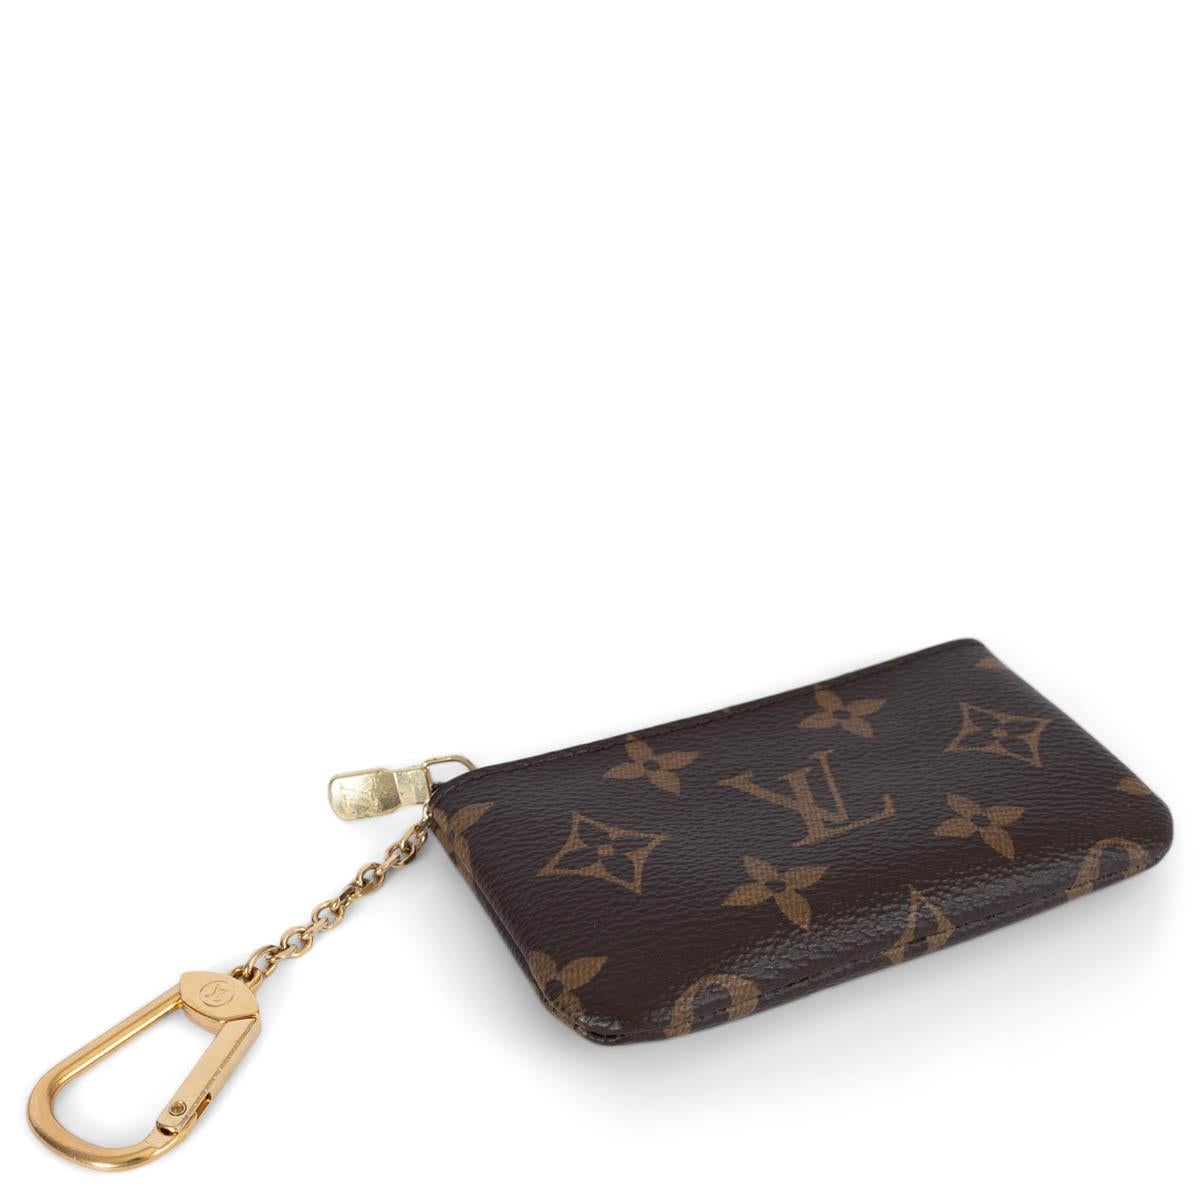 100% authentic Louis Vuitton key case in rown Monogram canvas. The design offers space for coins, cards, folded banknotes and other small items. It features an LV engraved zipper and attaches to the D-ring inside most Louis Vuitton handbags. It can